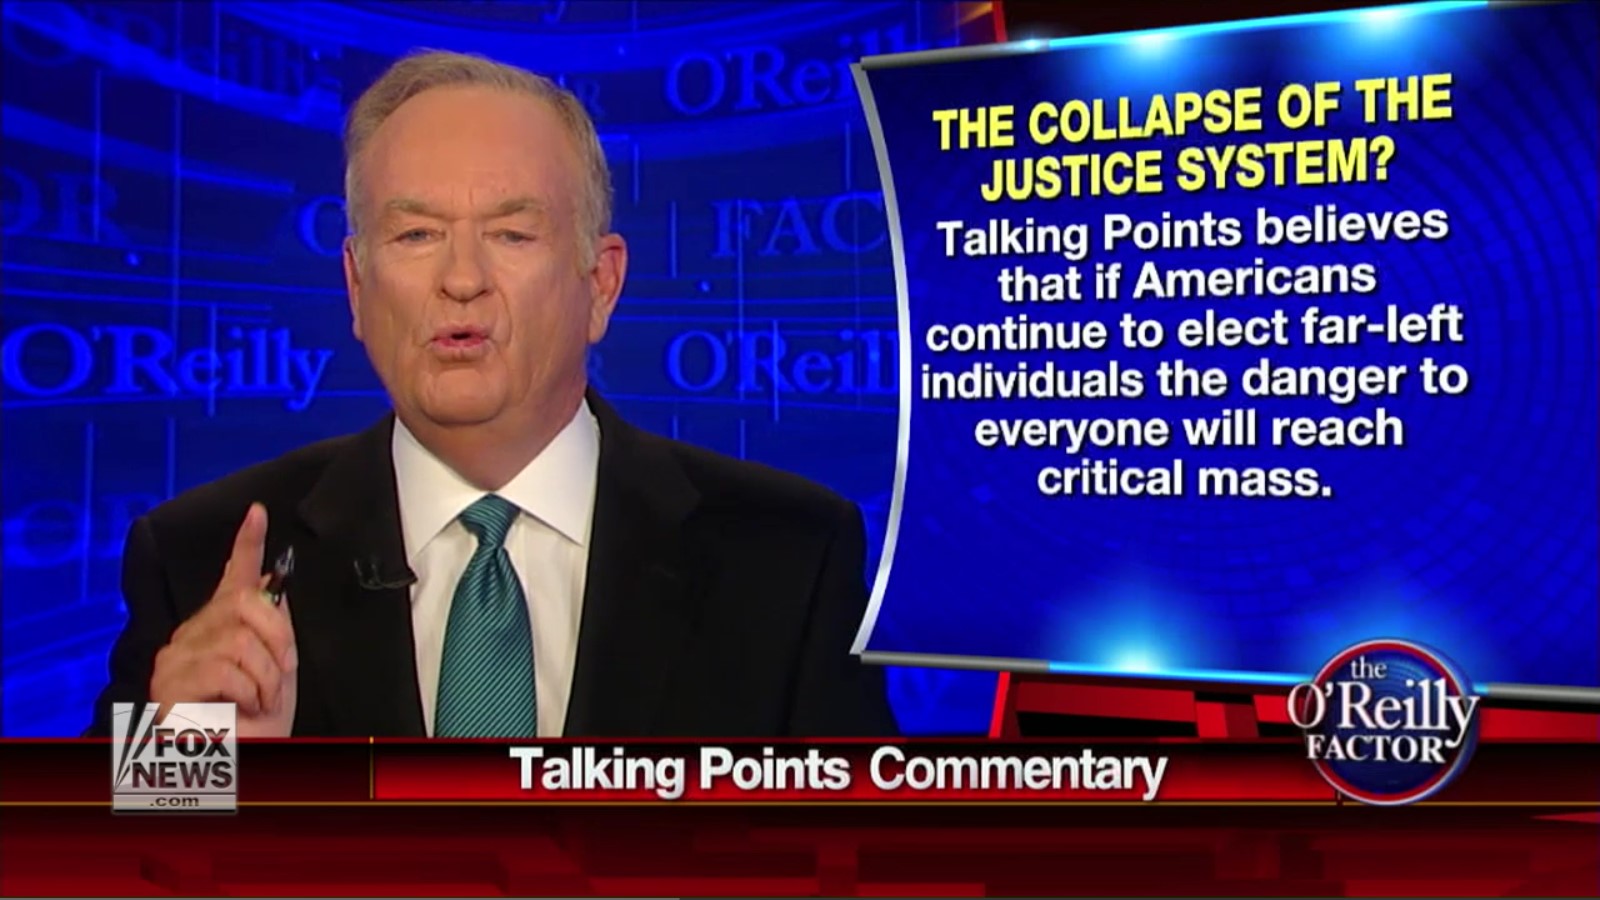 Fox News’ Bill O’Reilly: Voting For Liberals Will Be The Death Of Us All!